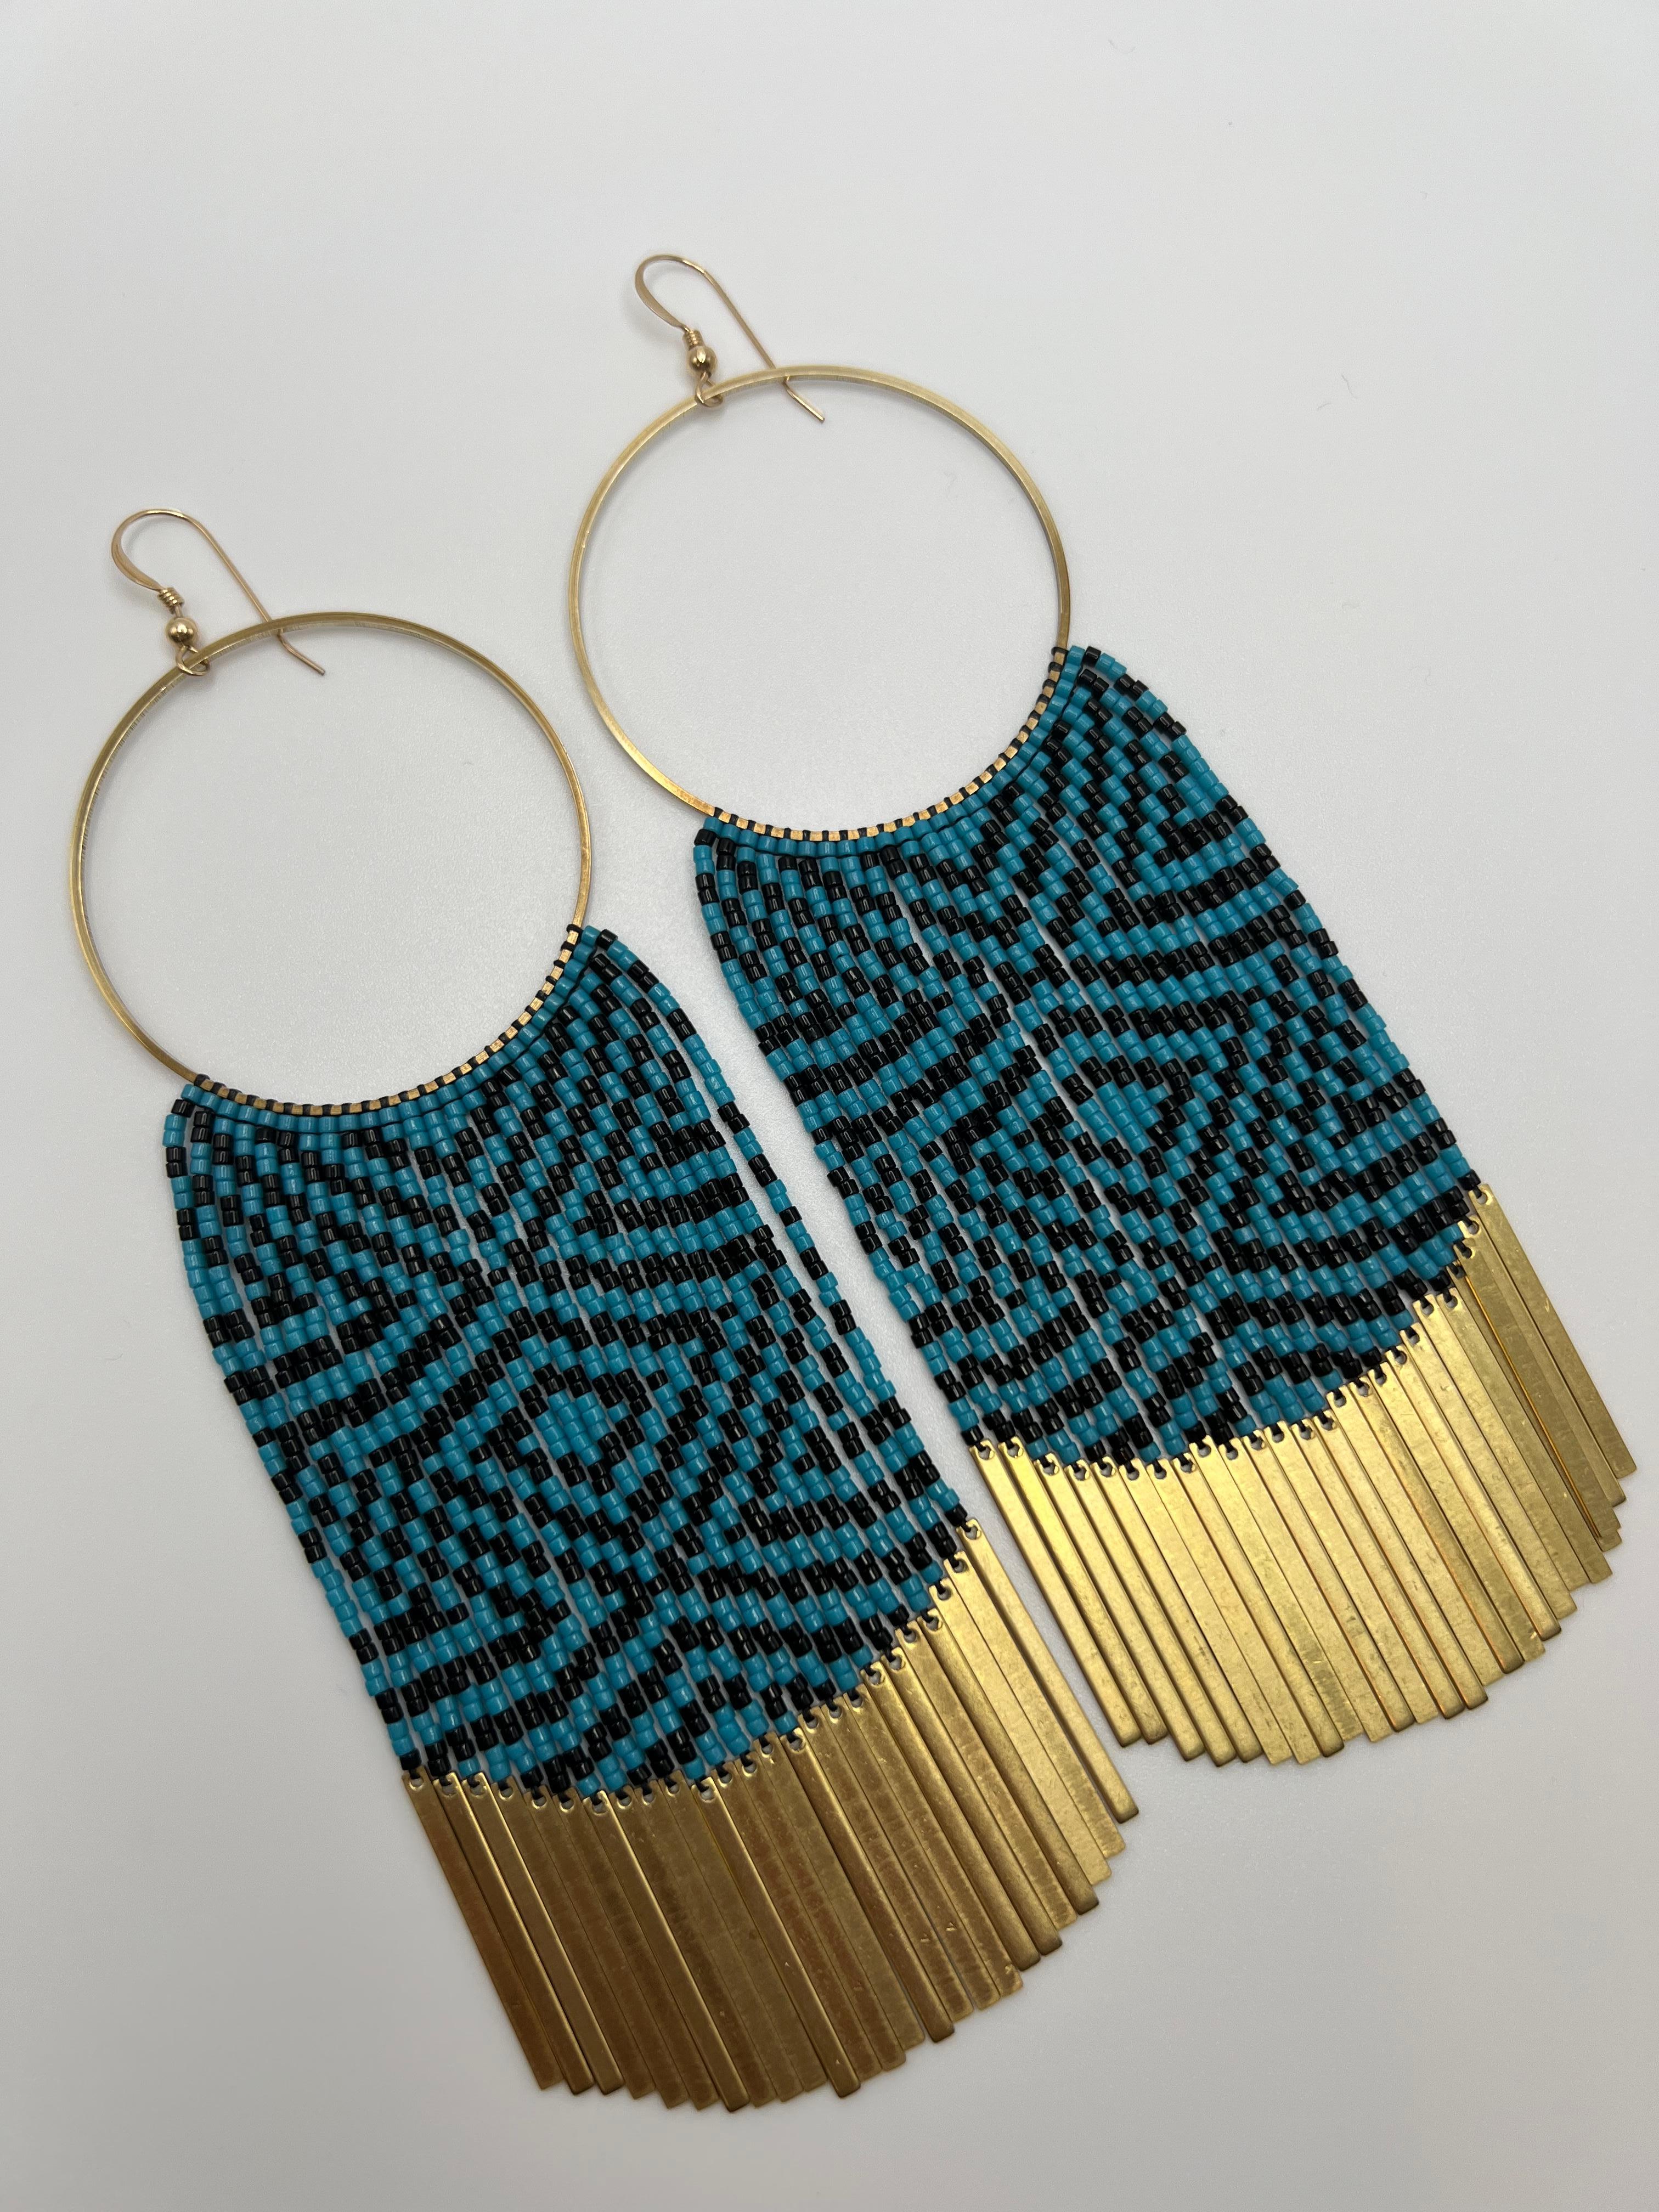 These earrings feature the Raven’s Tail pattern ‘Diamonds’ Raven’s Tail is an ancient form of textile weaving practiced by the Indigenous Peoples of the Northwest coast of North America. Once an extinct art Raven’s Tail has seen a major resurgence